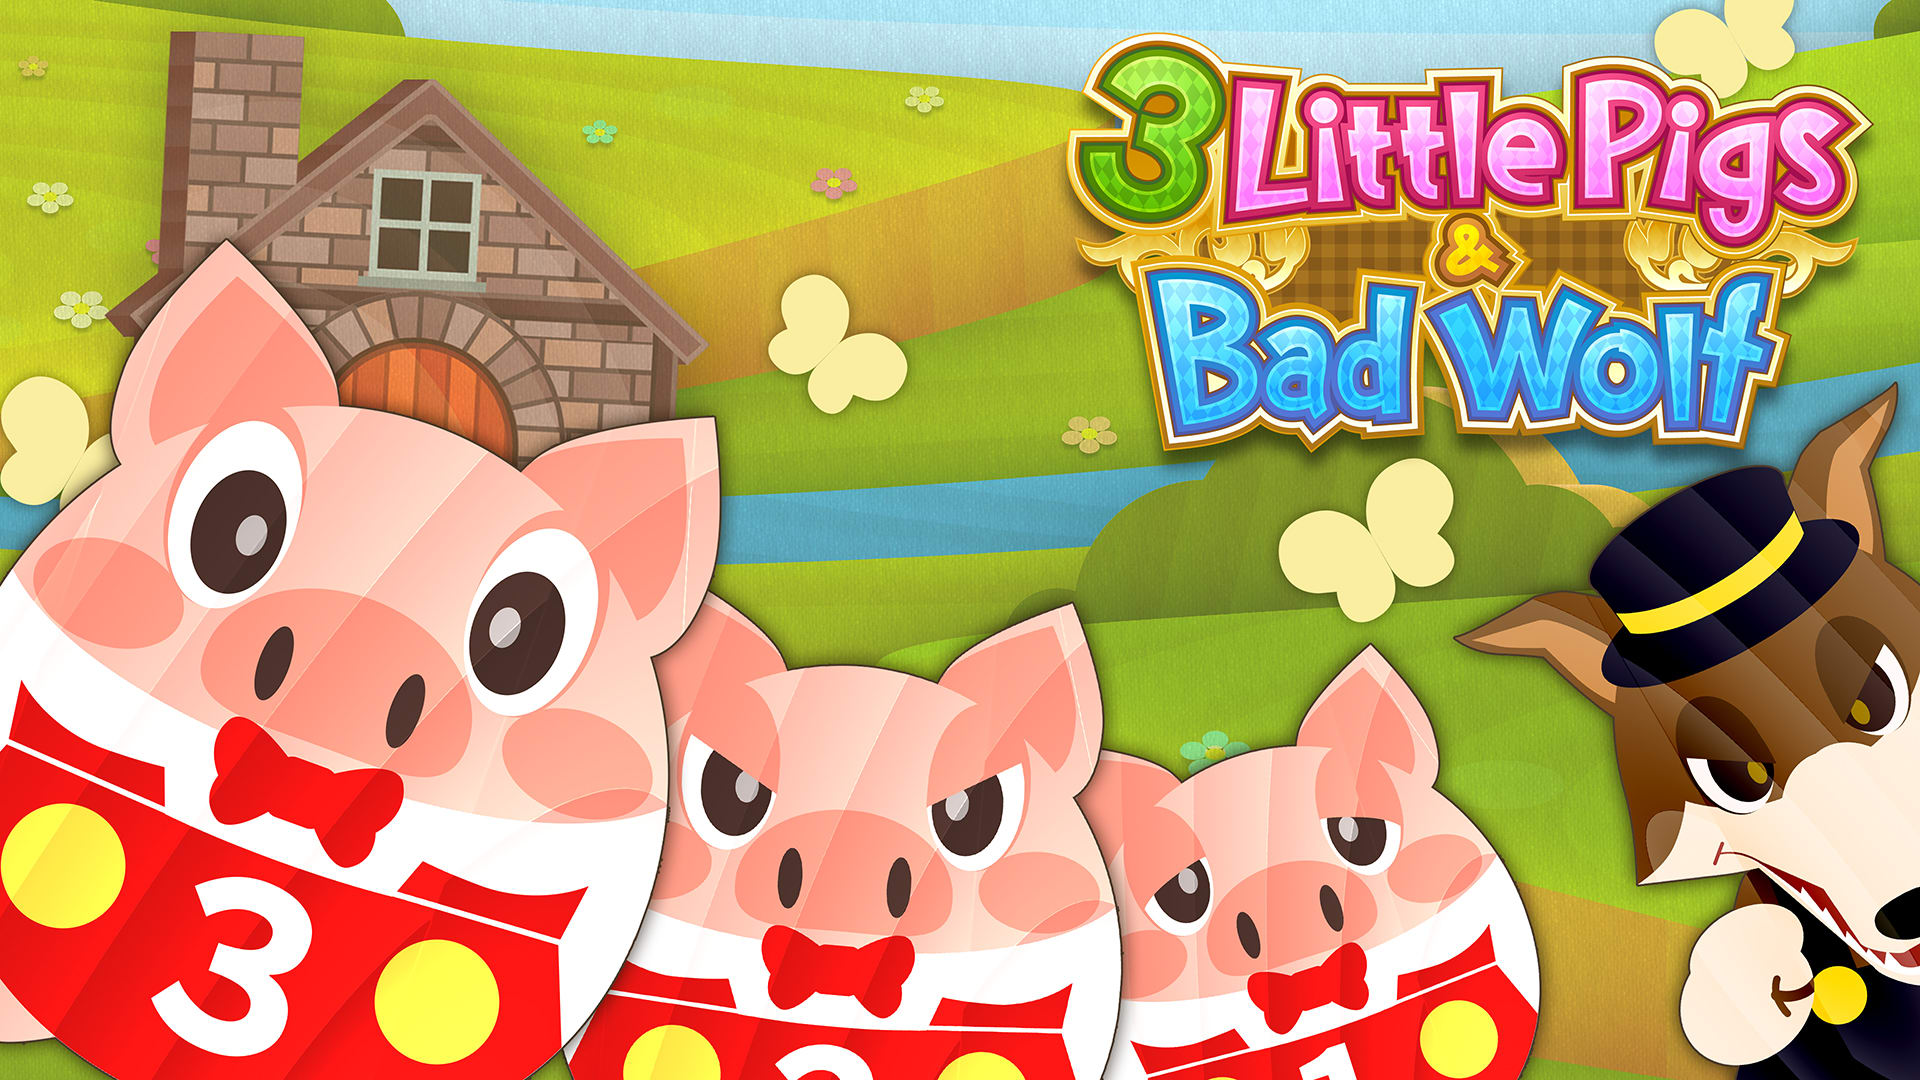 3 Little Pigs & Bad Wolf 1